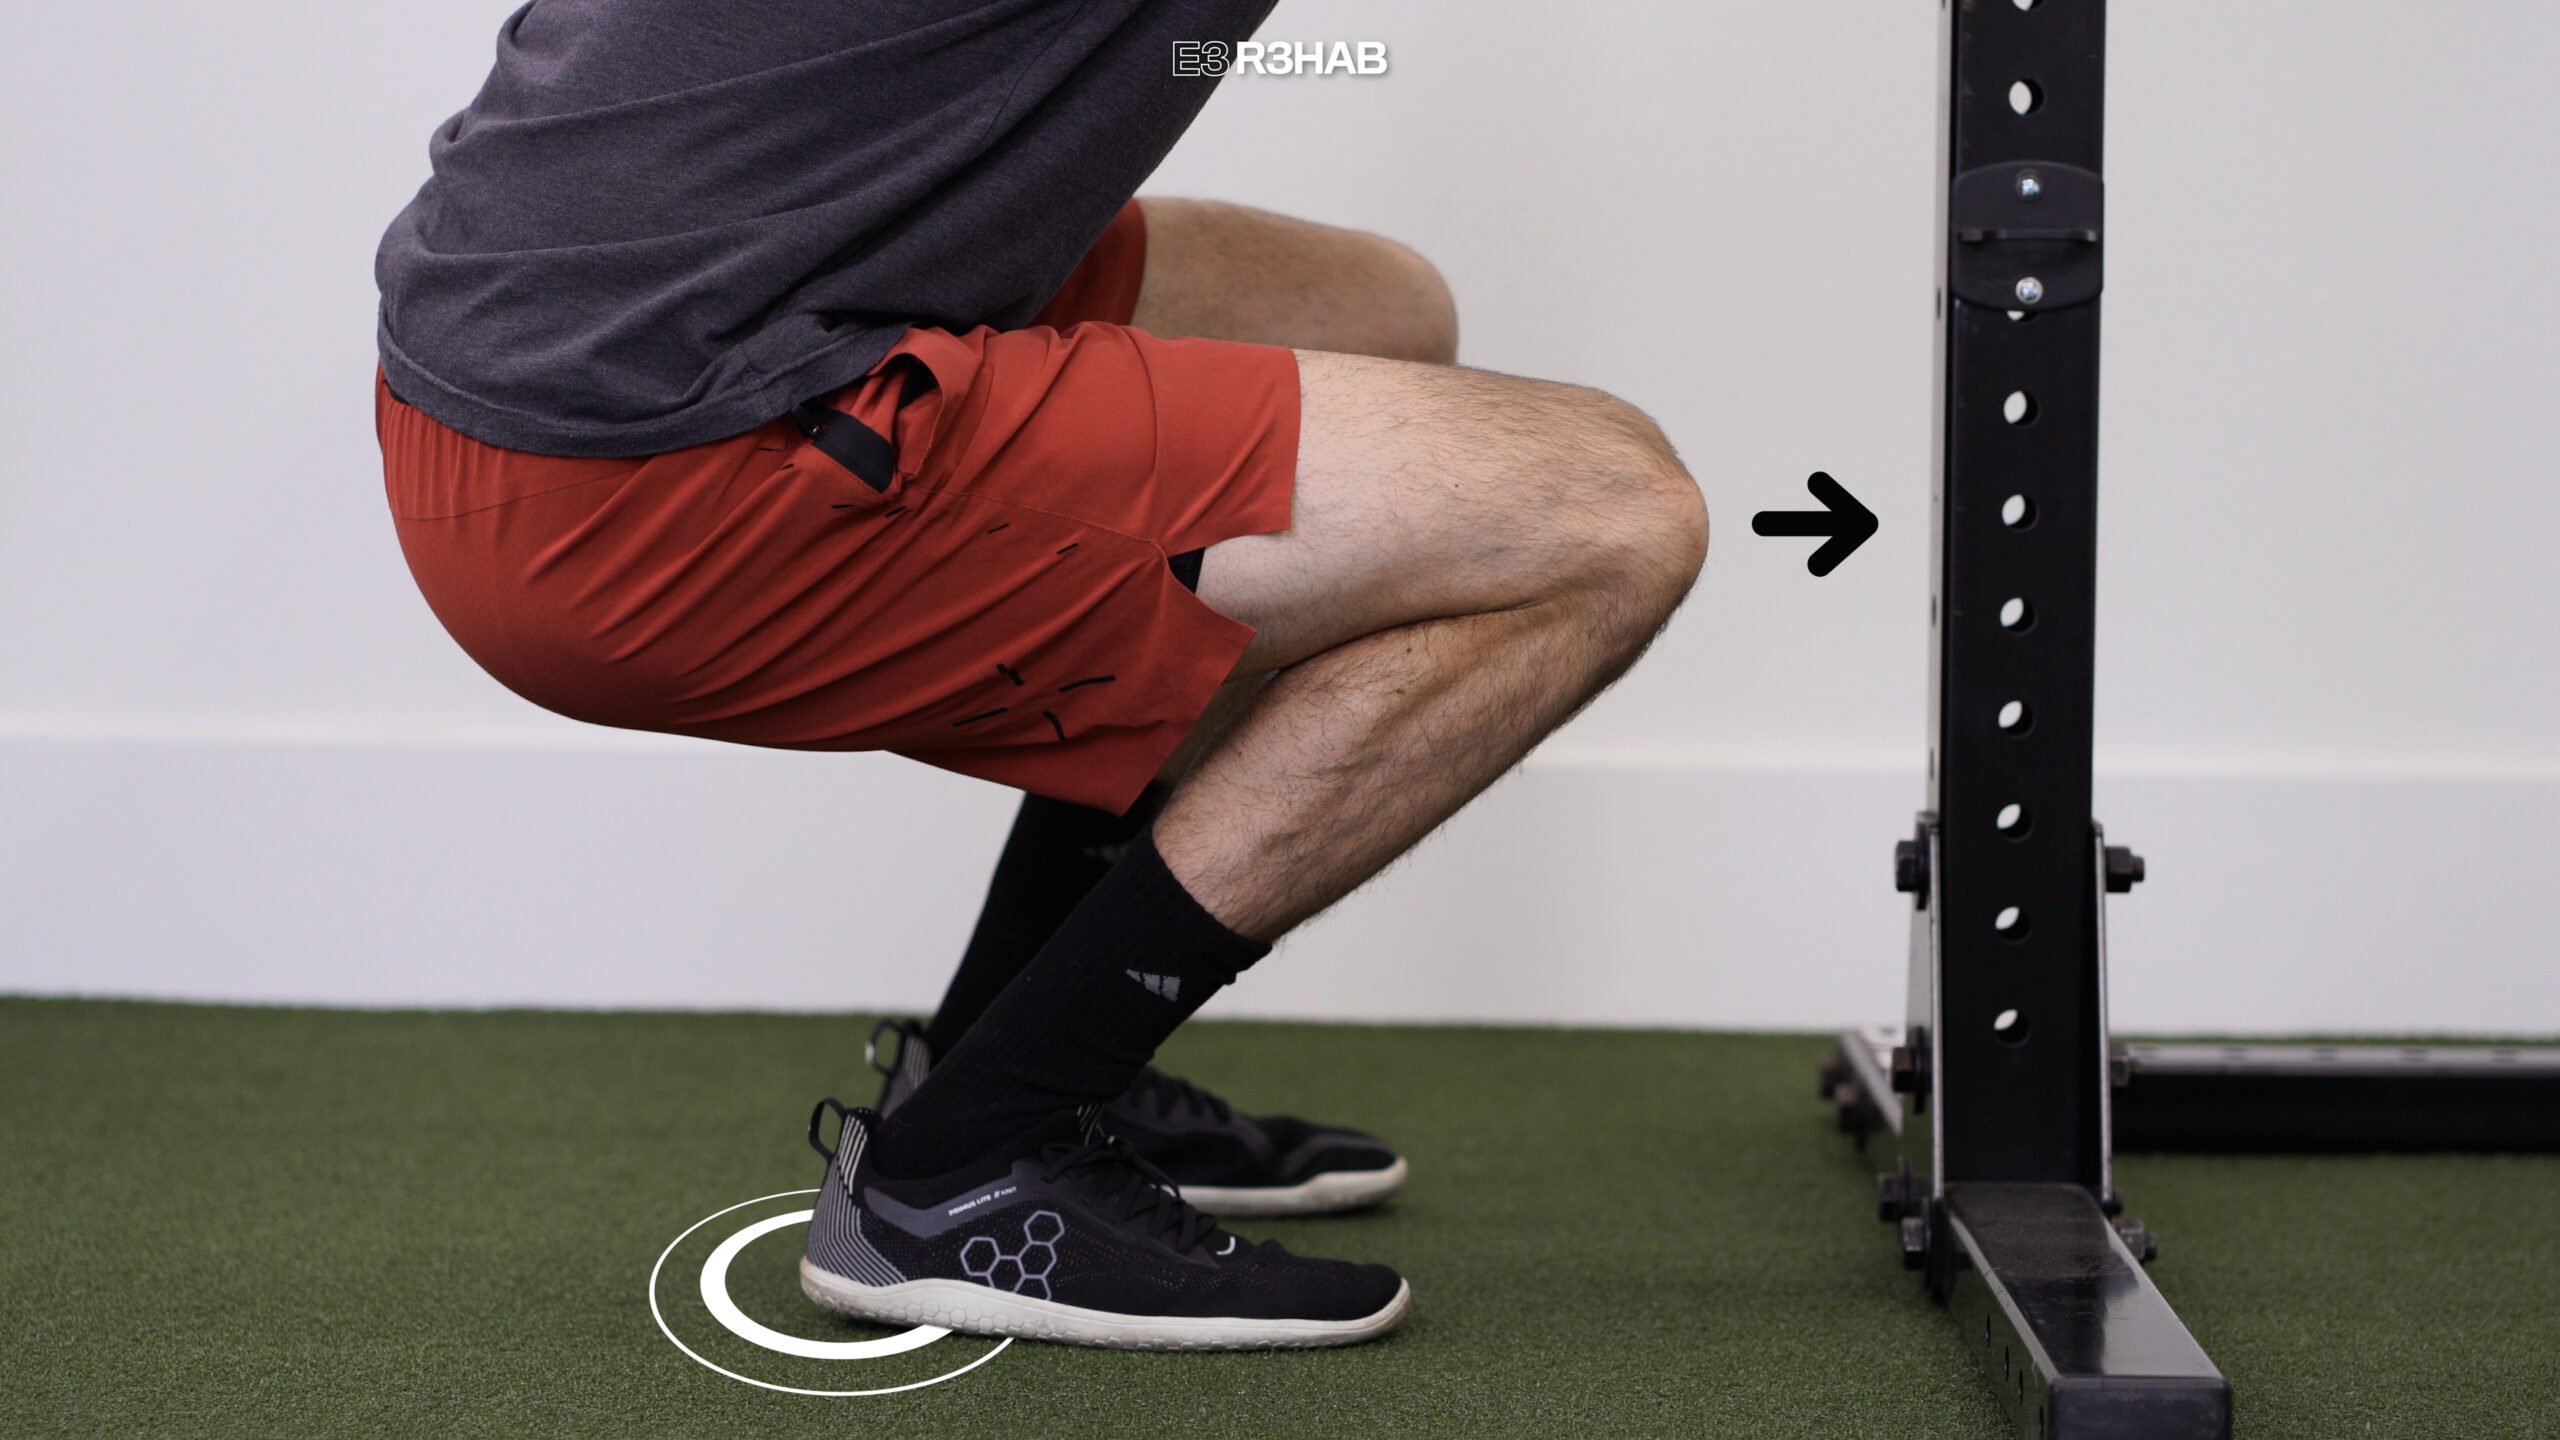 How To Assess And Improve Ankle Dorsiflexion Once And For All